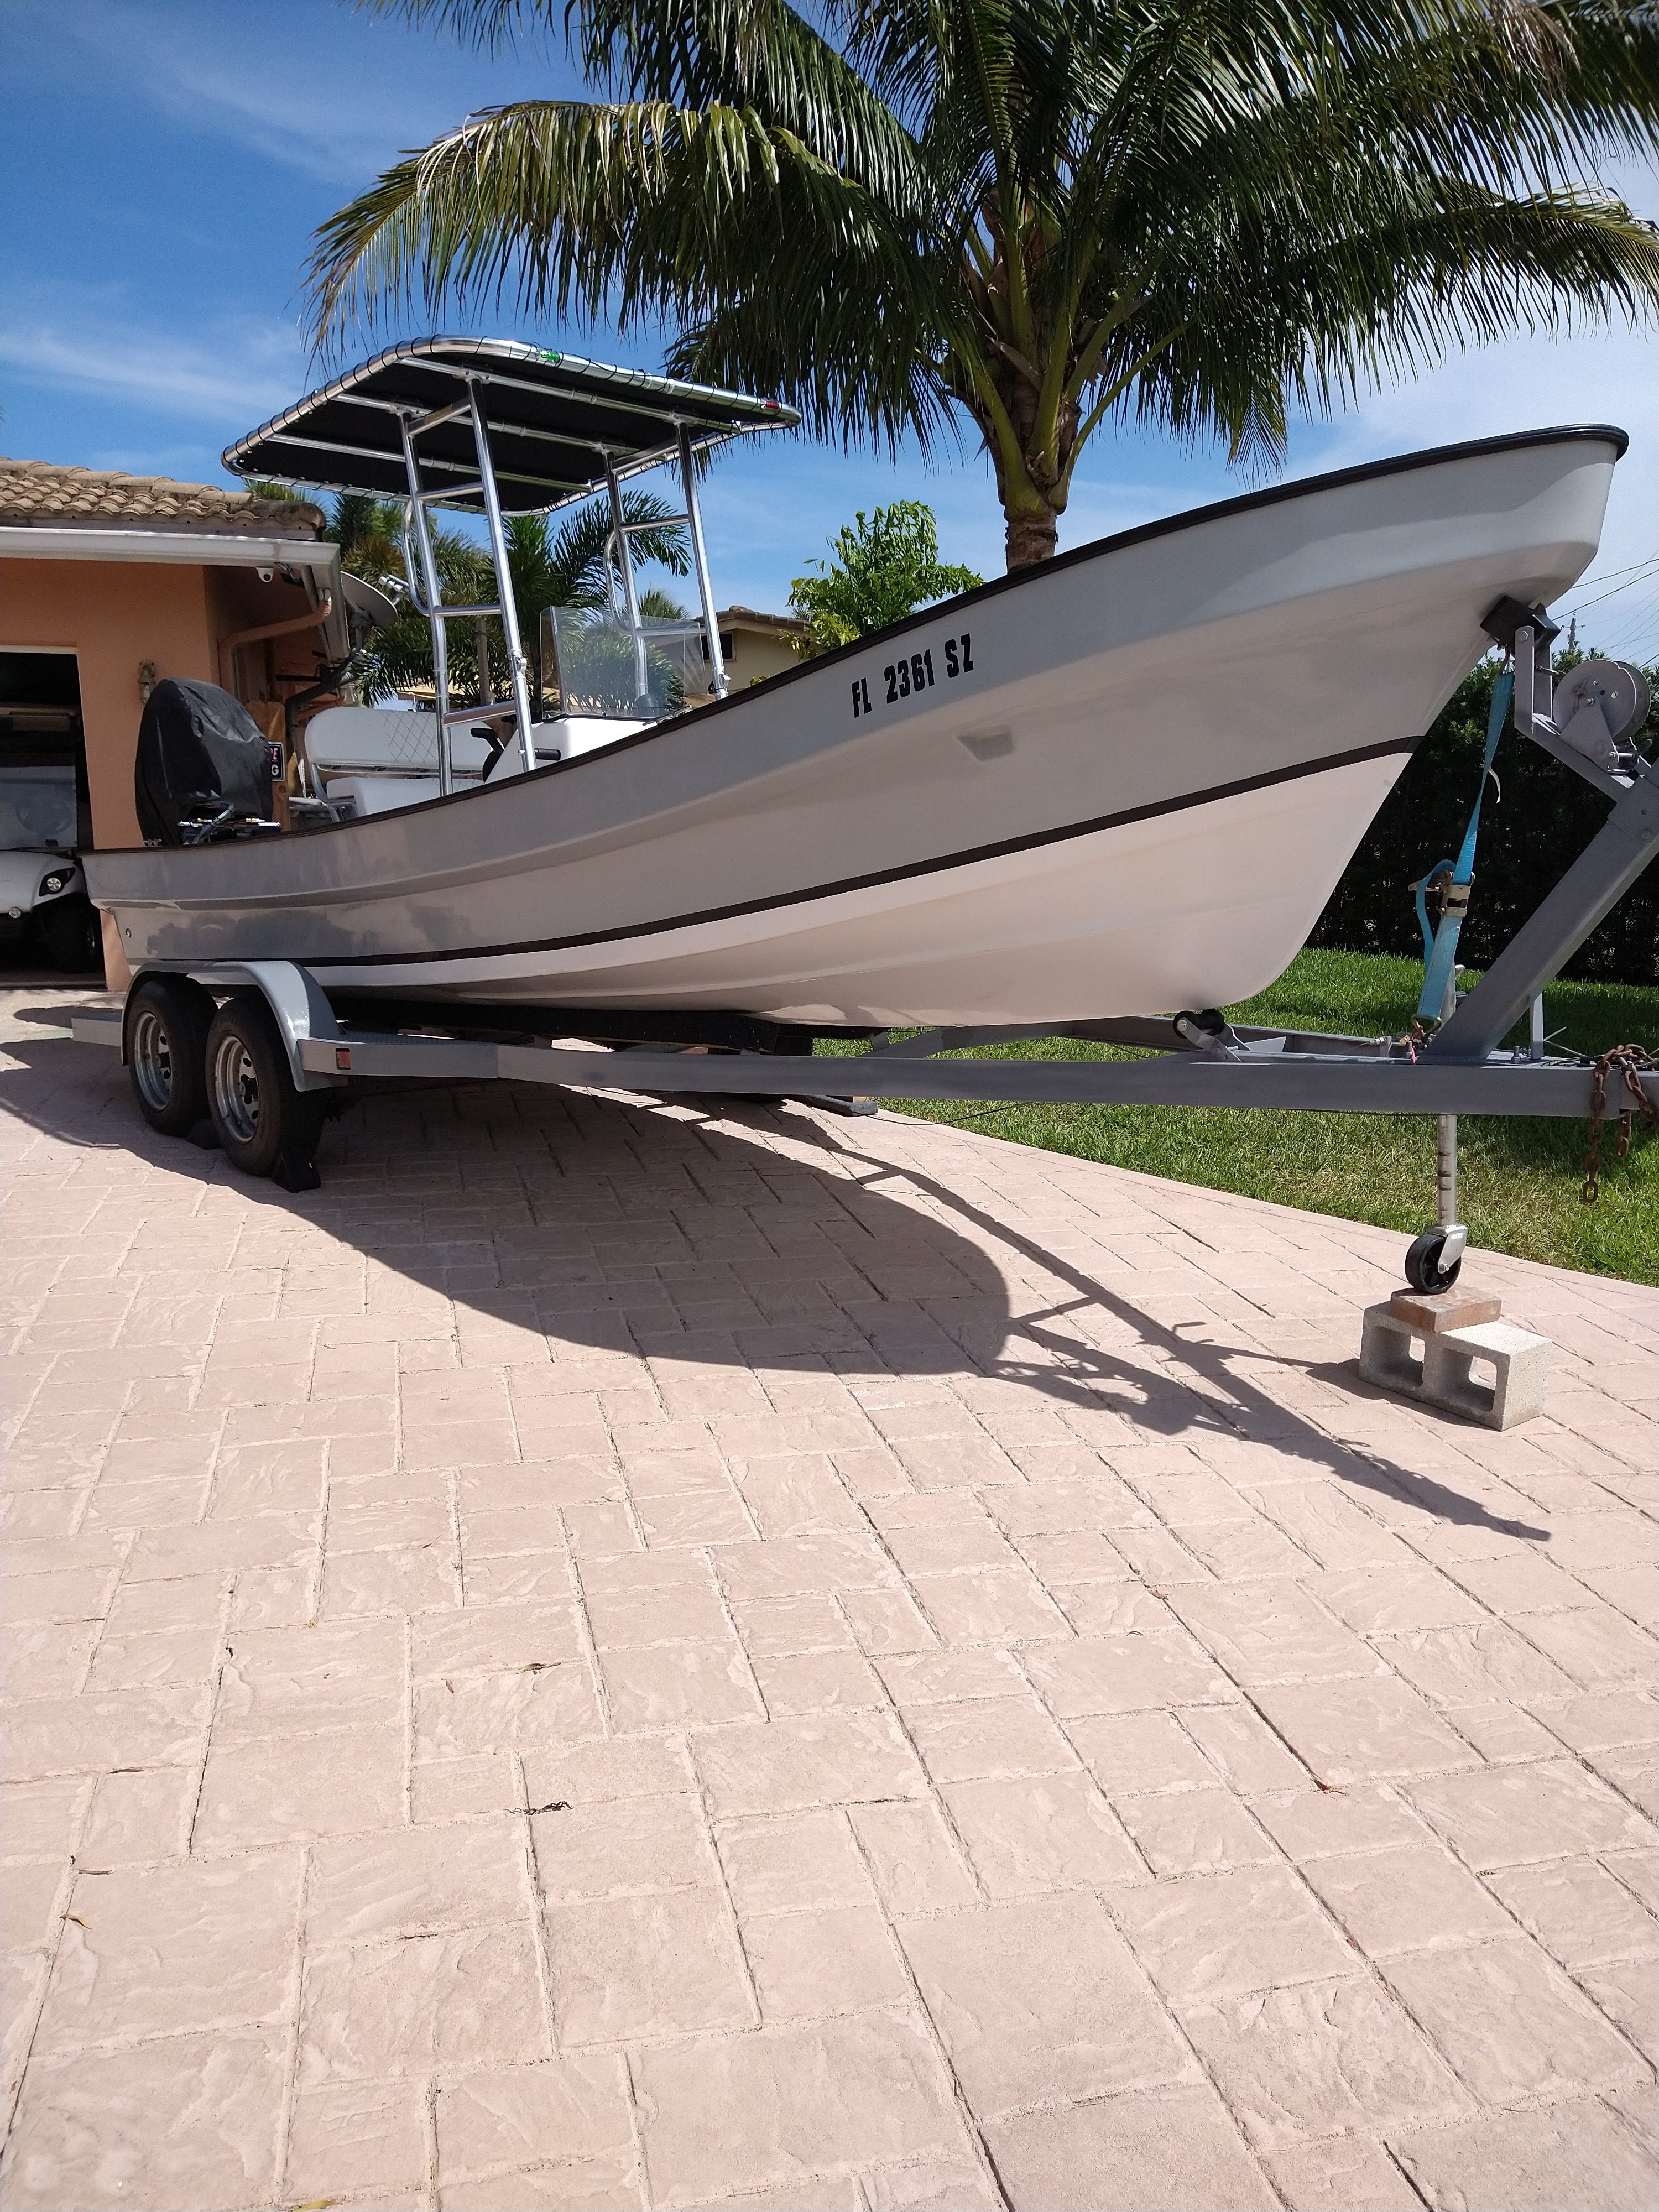 2021 23 foot none Panga Power boat for sale in Pompano Beach, FL - image 1 